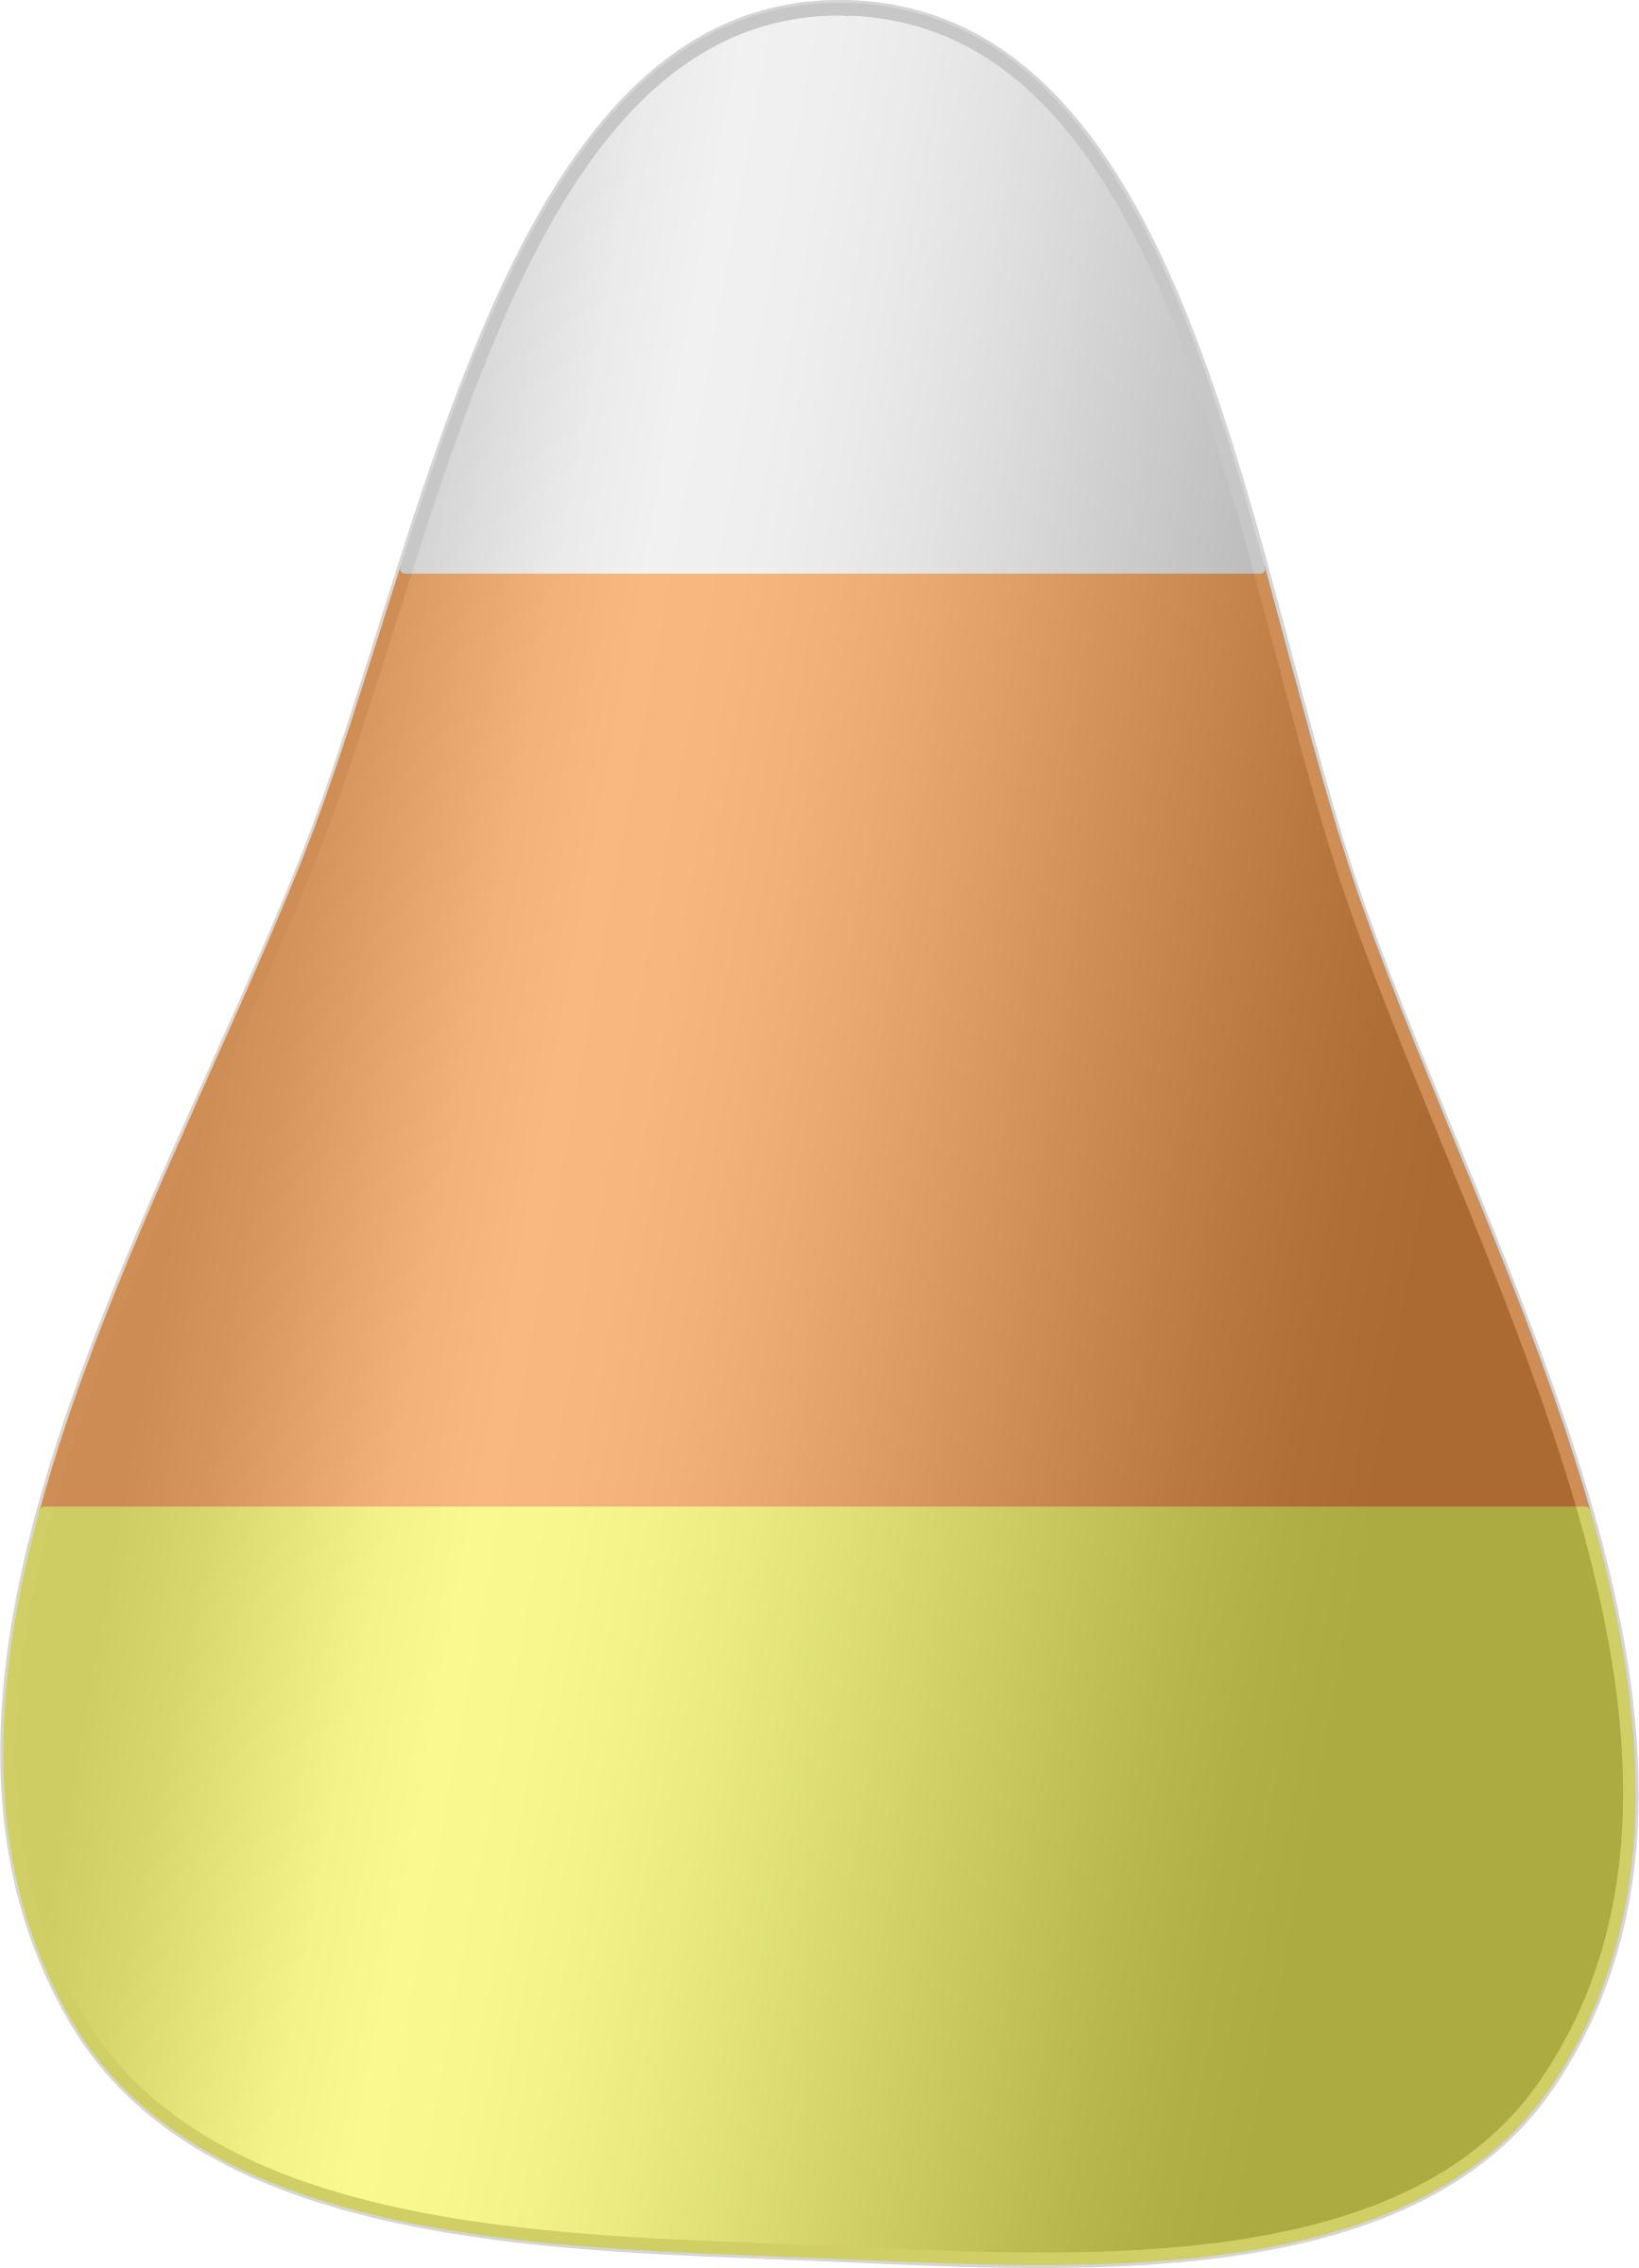 Candy Corn 02 png